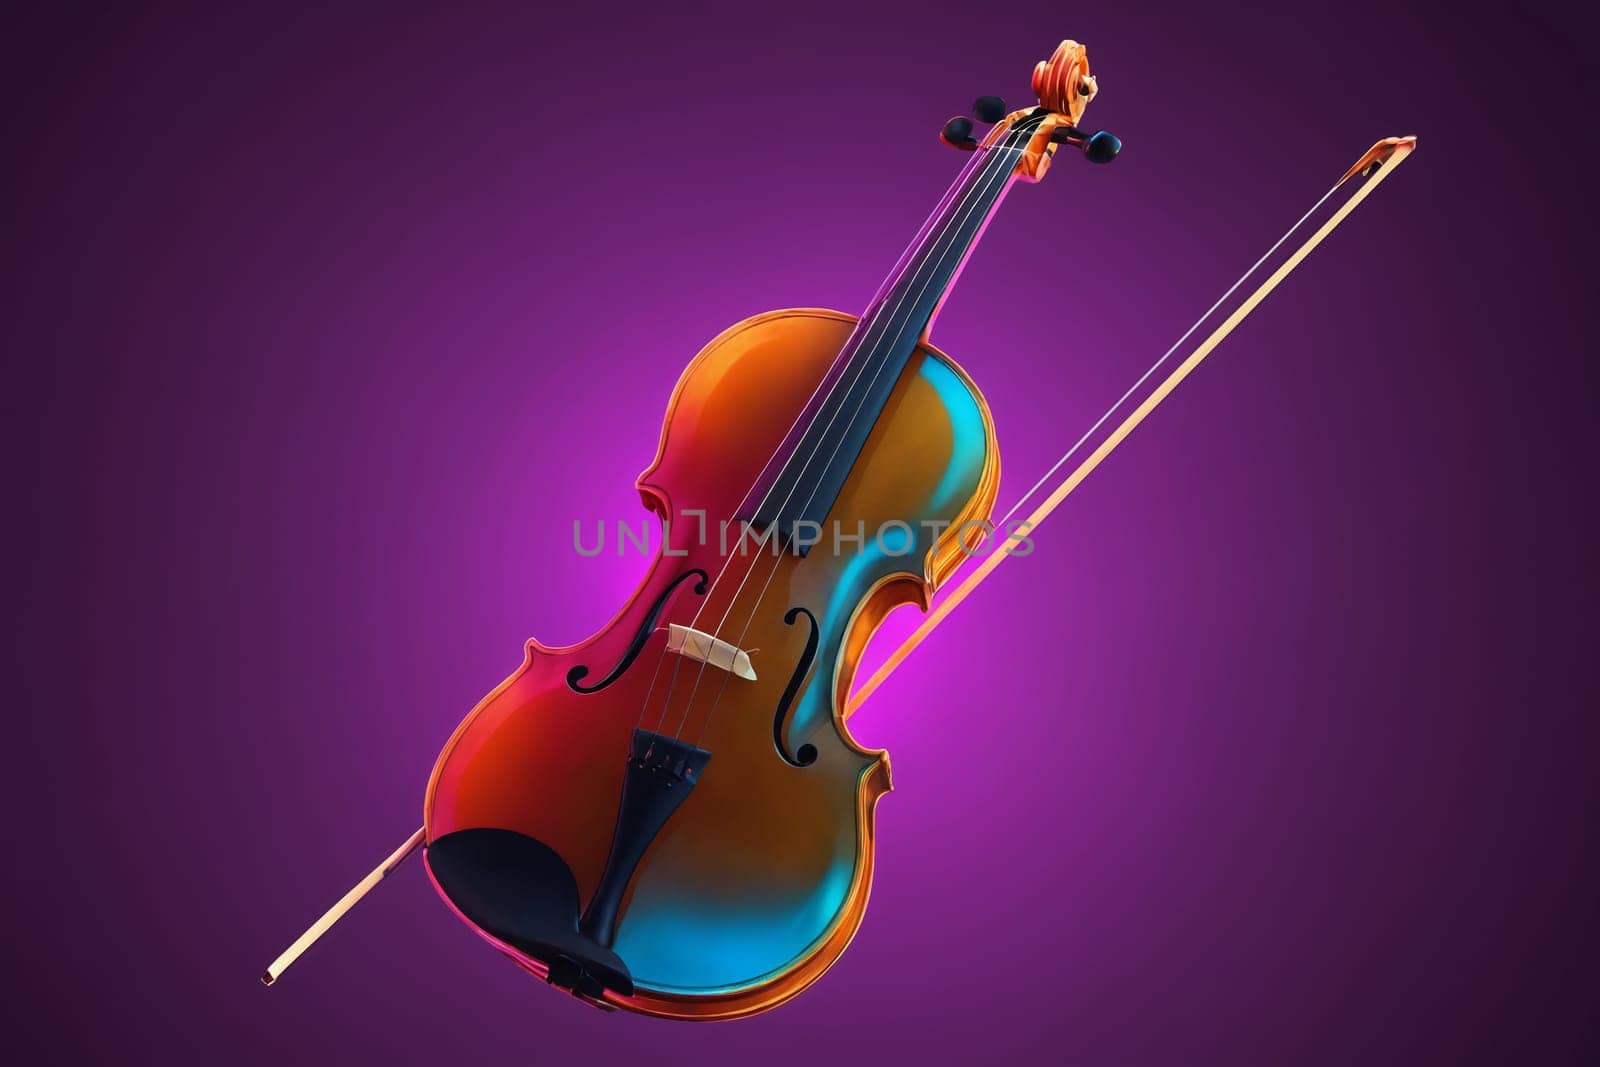 Violin Serenade: A Luminous Encounter with Music and Color by Andre1ns